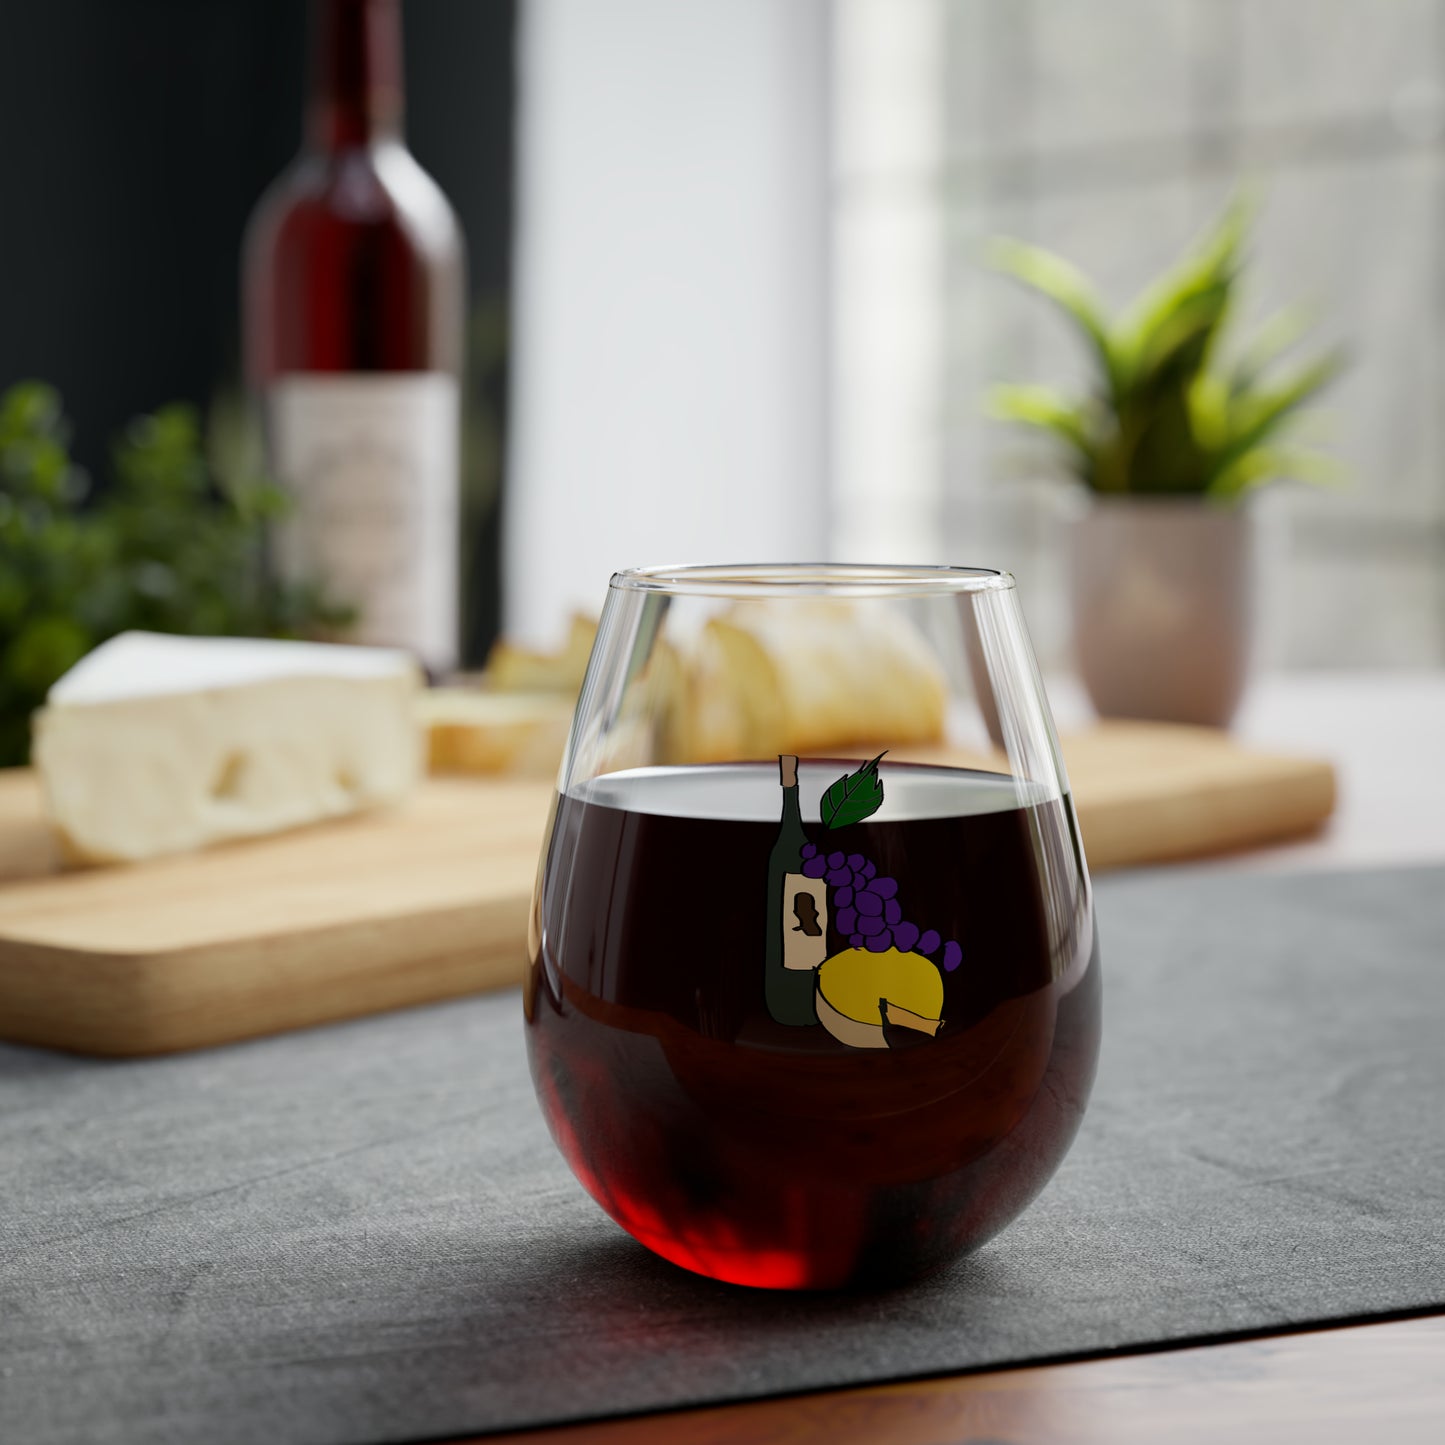 Wine and Cheese Stemless Wine Glass, 11.75oz